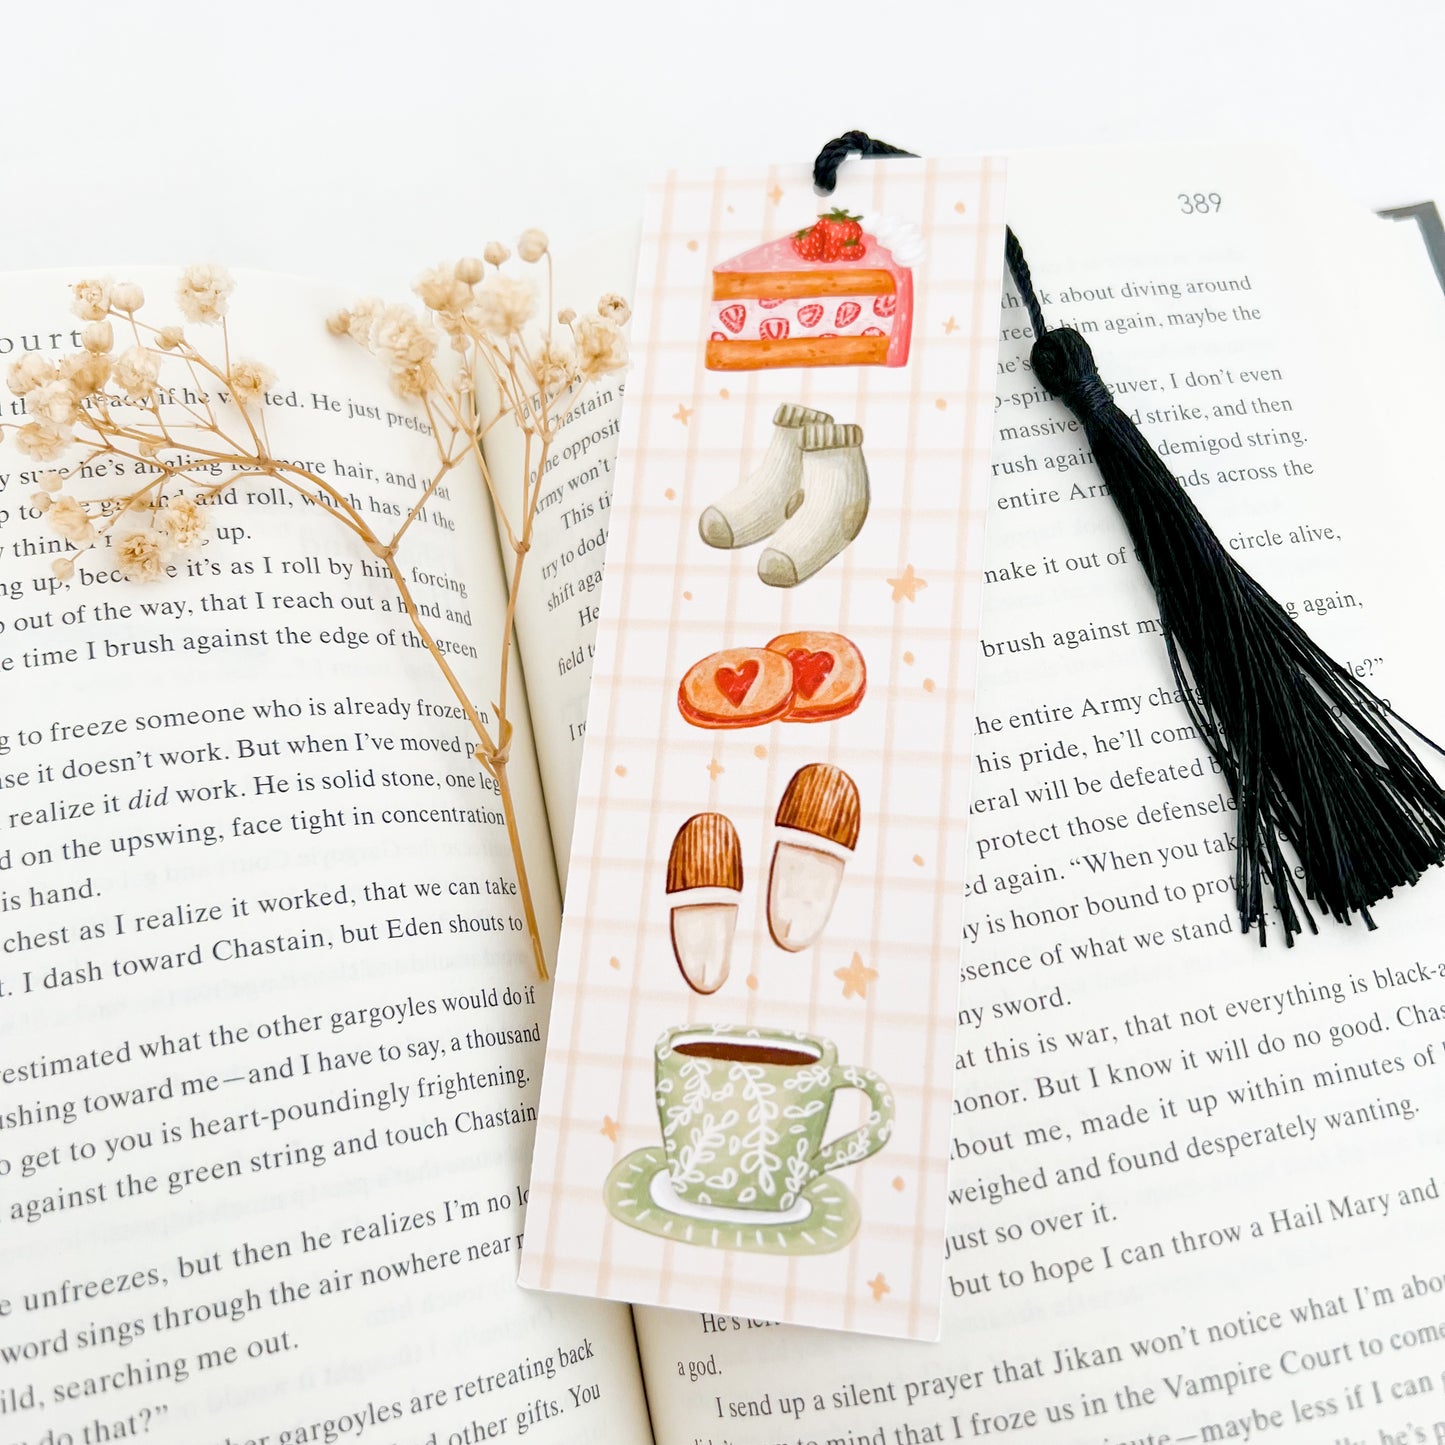 'READING TIME' Bookmark